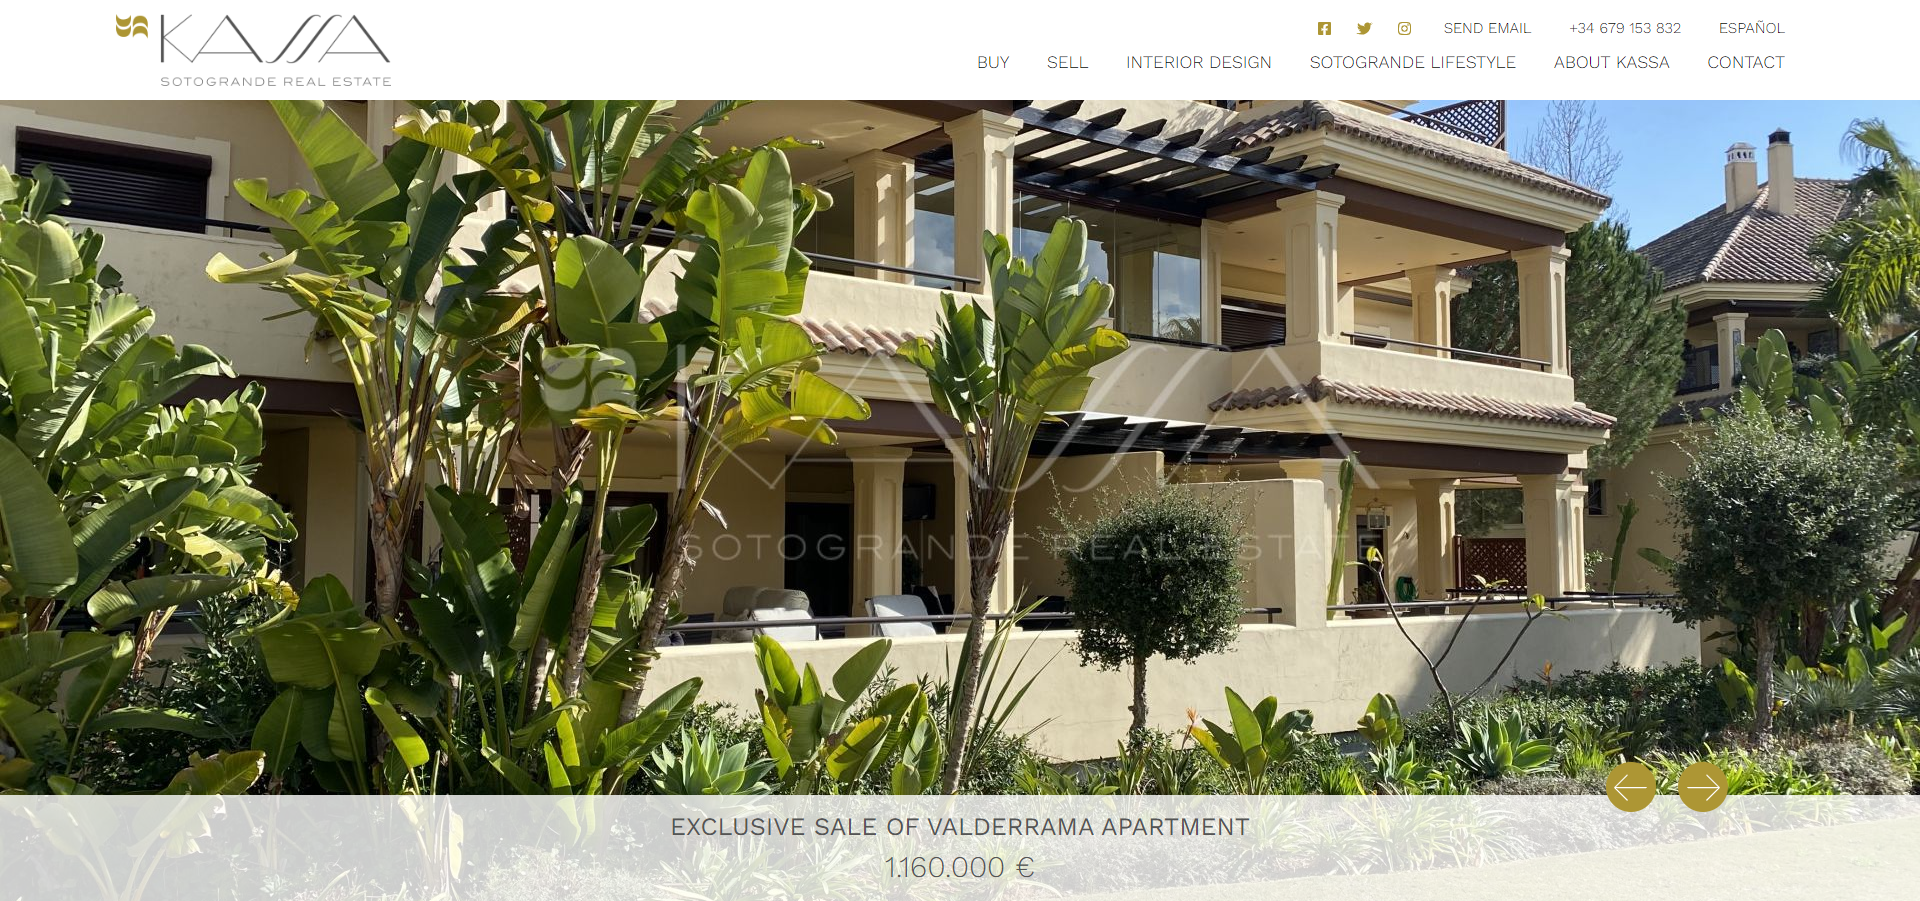 Professional, Reliable And Expert Service | Kassa Sotogrande